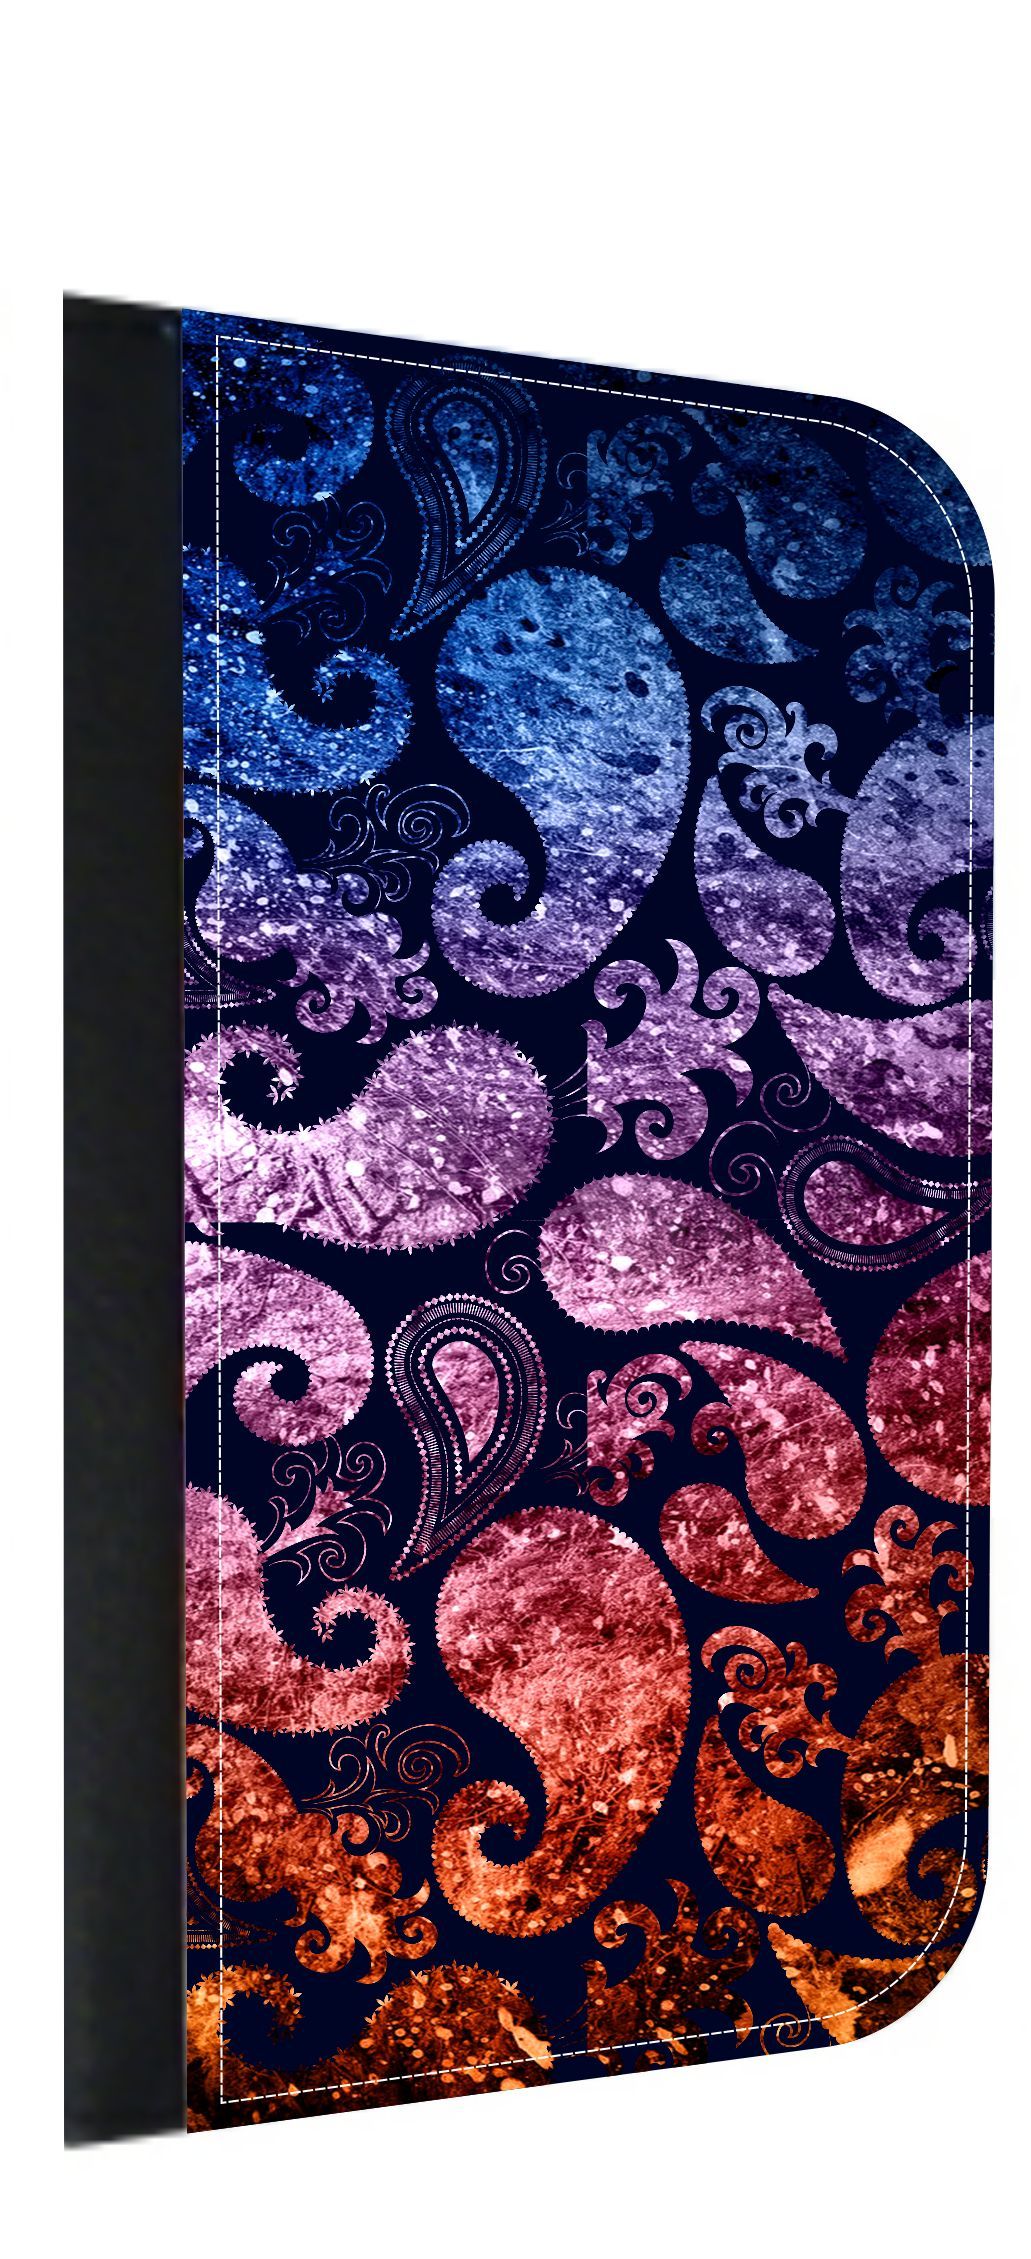 Grunge Paisley Pattern Print - Galaxy s10p Case - Galaxy s10 Plus Case - Galaxy s10 Plus Wallet Case - s10 Plus Case Wallet - Galaxy s10 Plus Case Wallet - s10 Plus Case Flip Cover - image 1 of 3